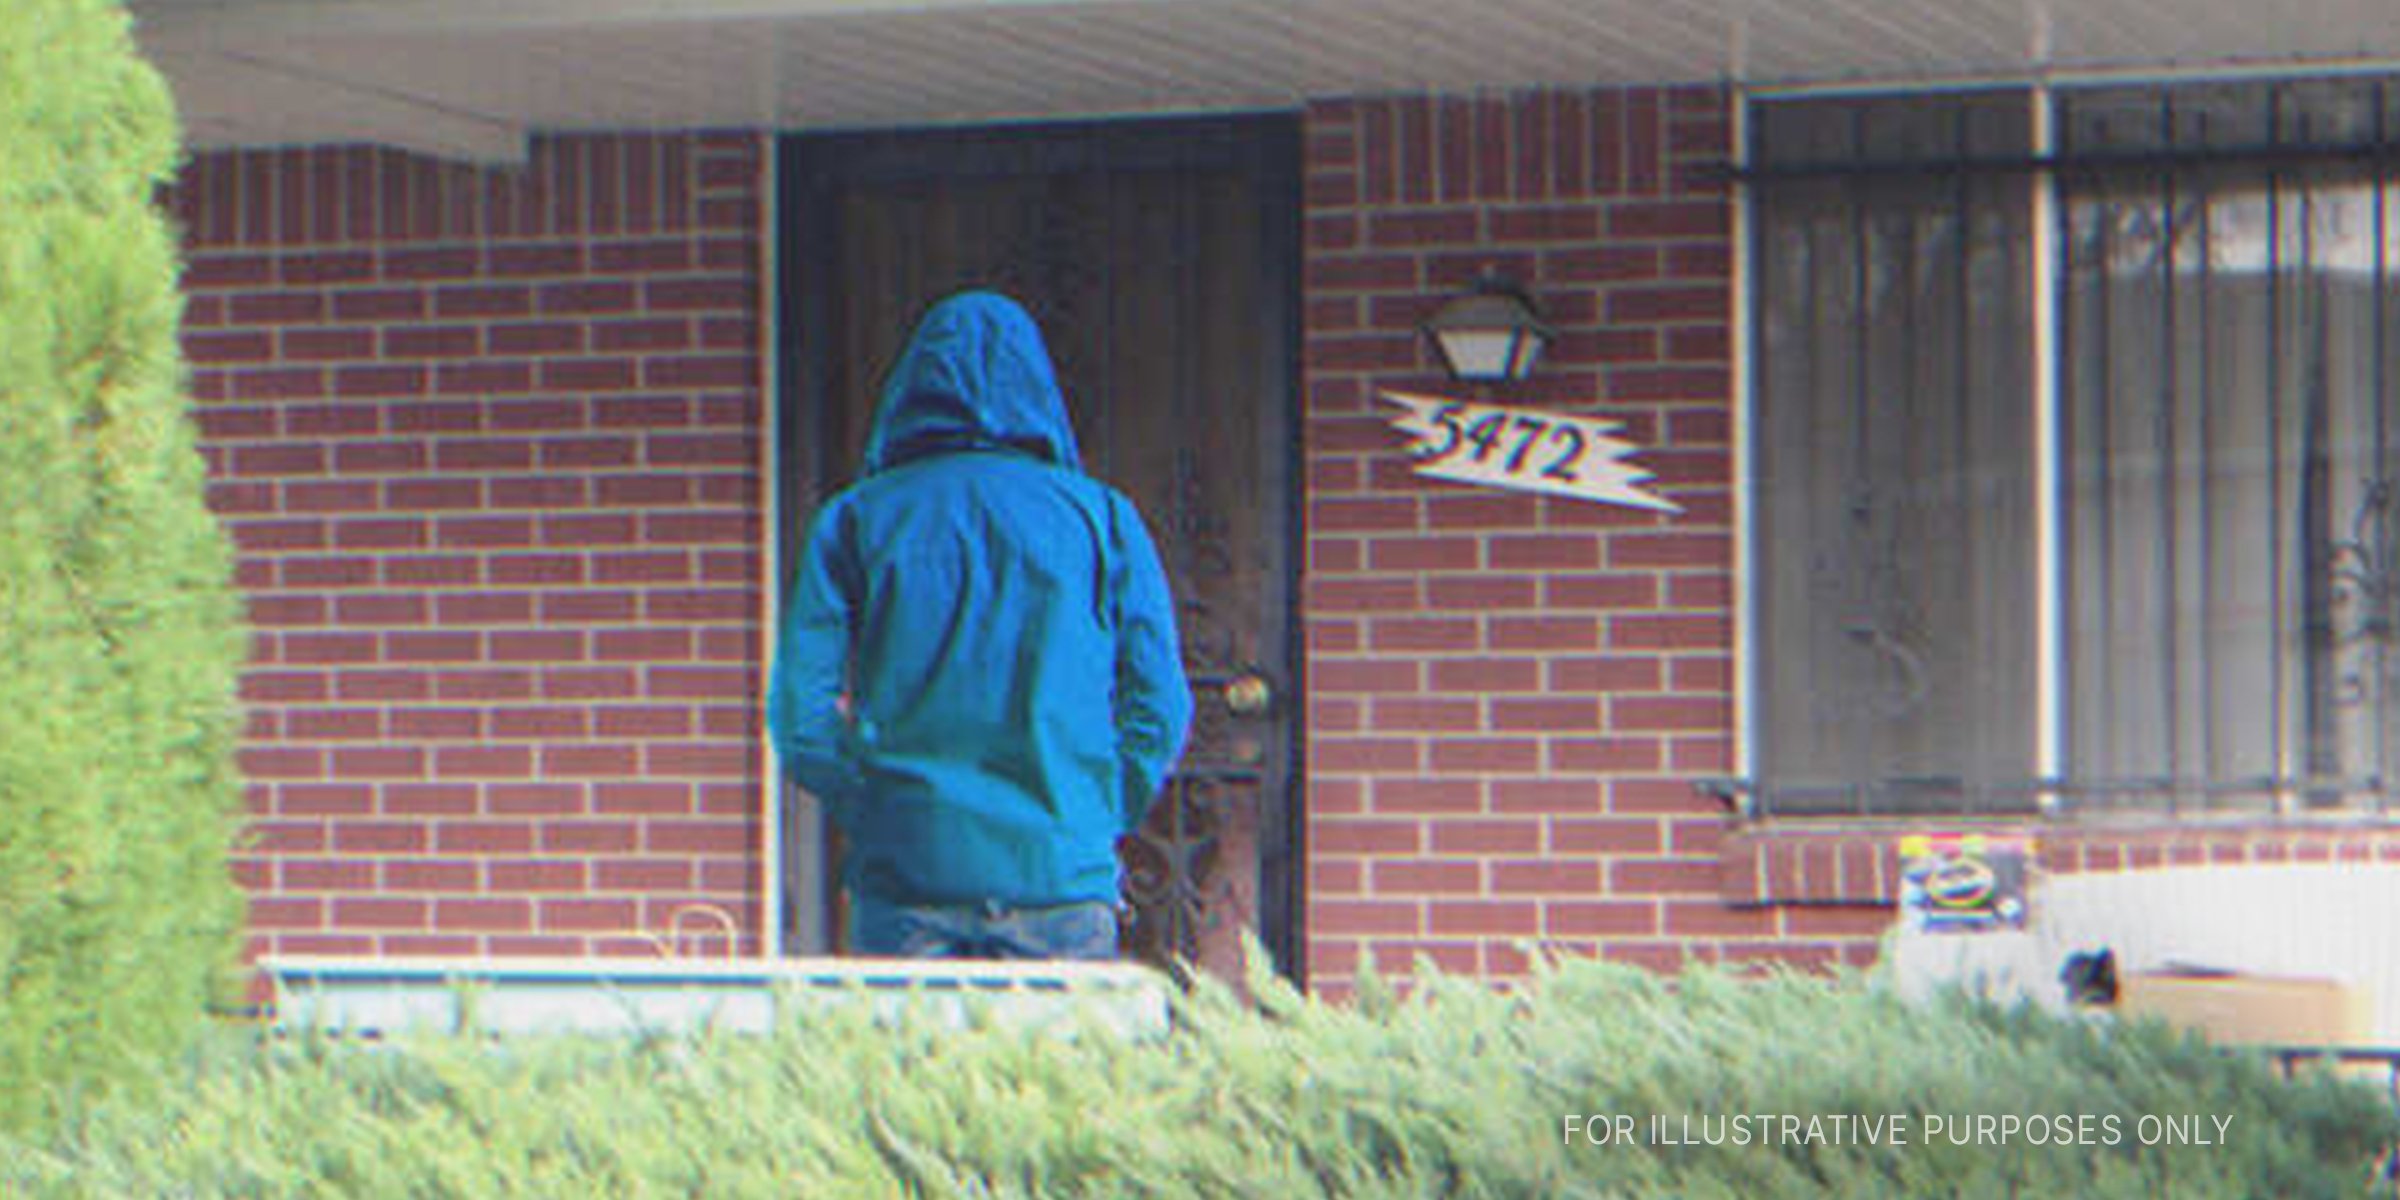 A teenager waiting by a front door. | Source: Flickr / AFL-CIO Field (CC BY 2.0) 